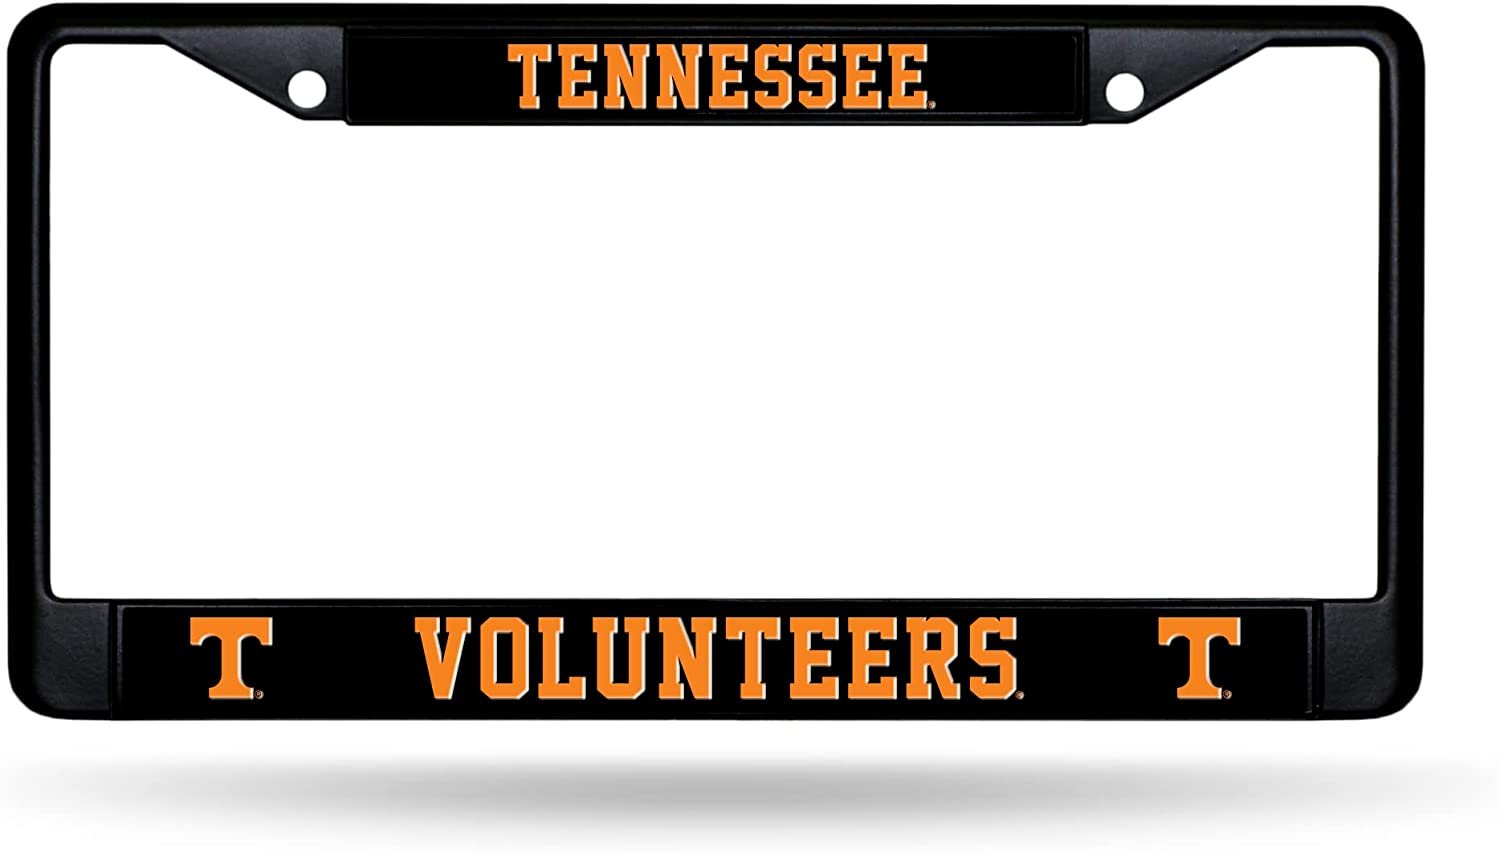 University of Tennessee Volunteers Black Metal License Plate Frame Chrome Tag Cover 6x12 Inch